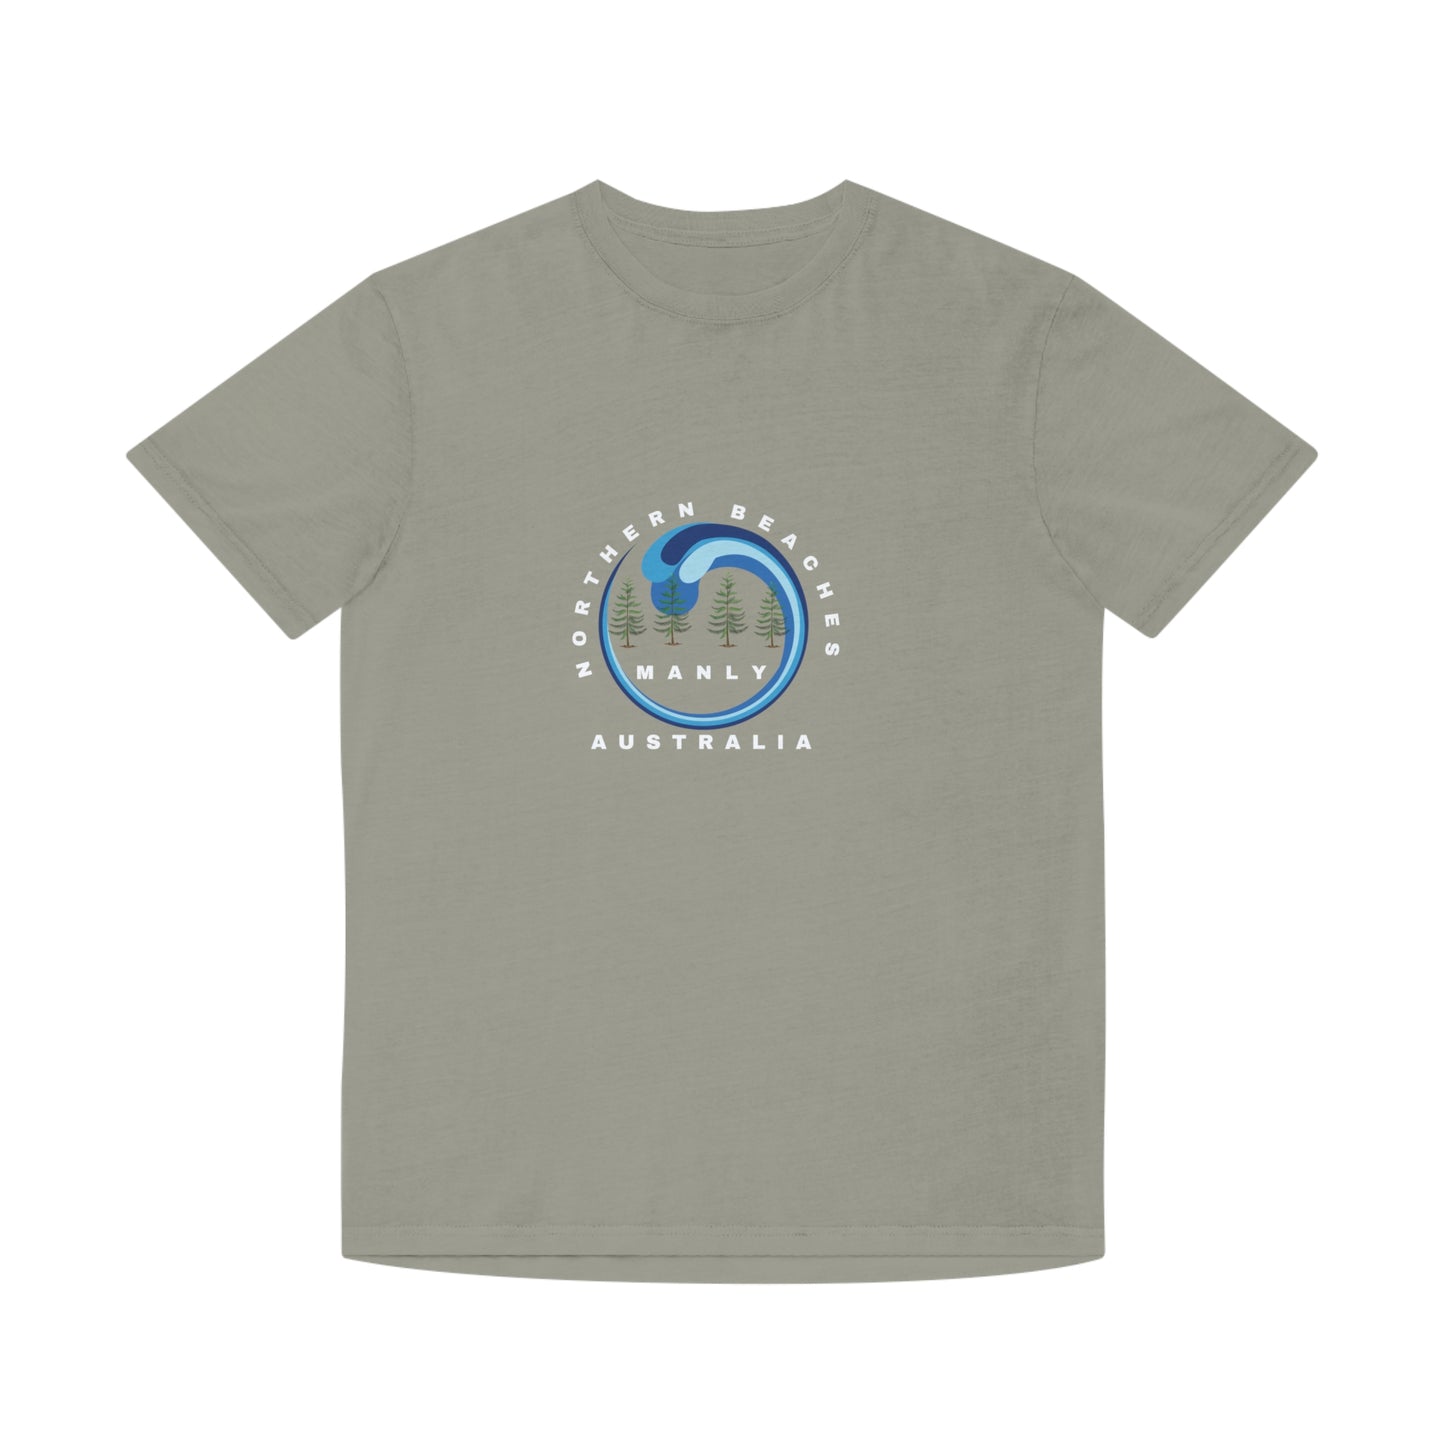 Faded cotton T-Shirt Northern Beaches Manly Australia logo